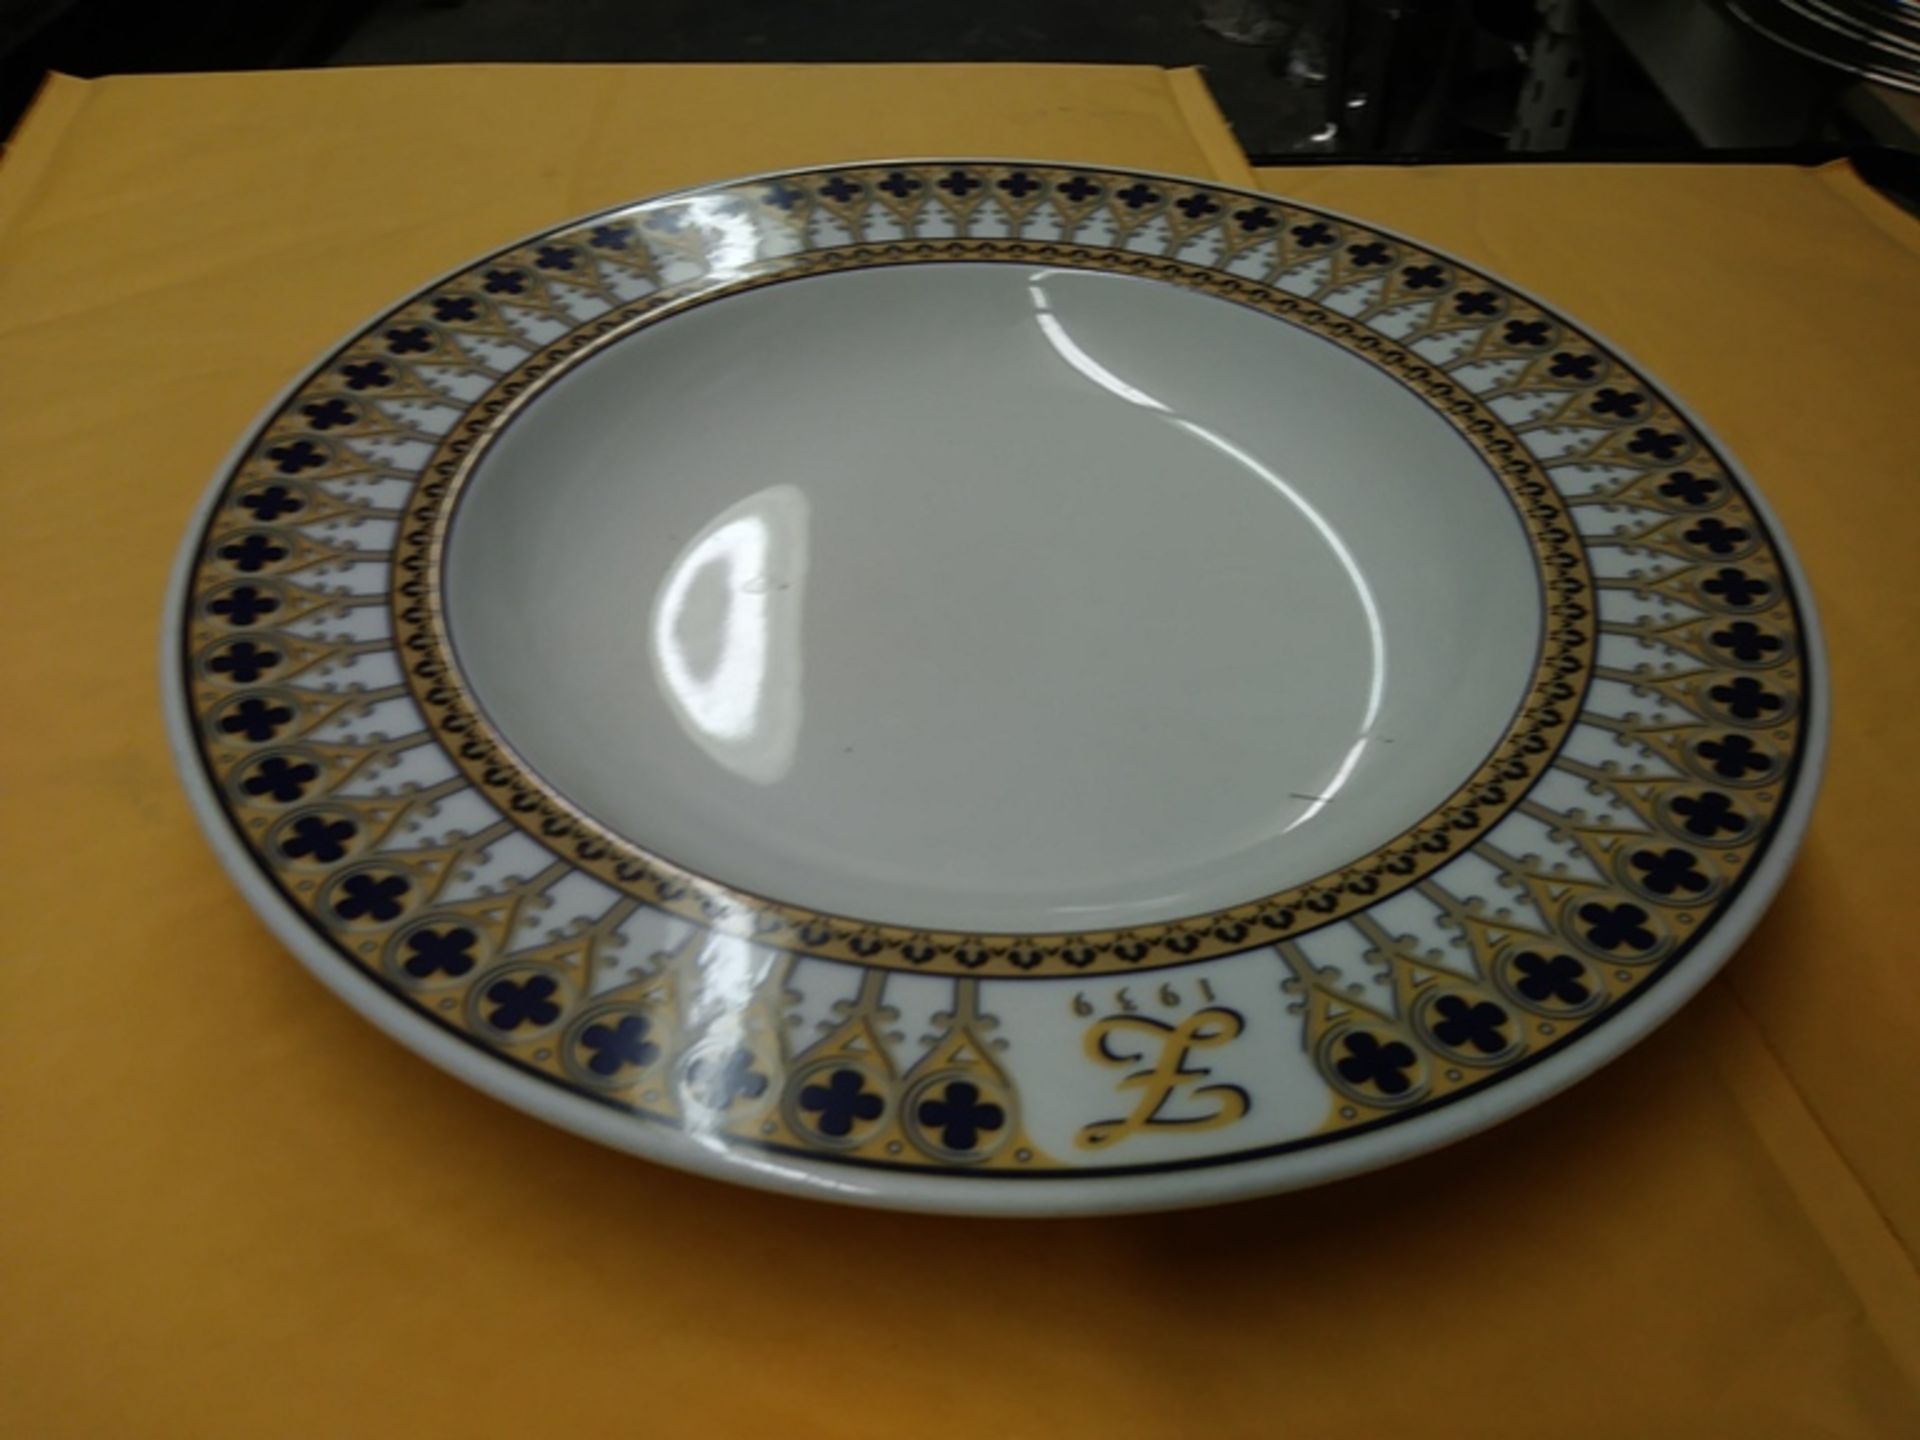 SCHONWALD 12" PLATES (INCLUDES QTY: 272)